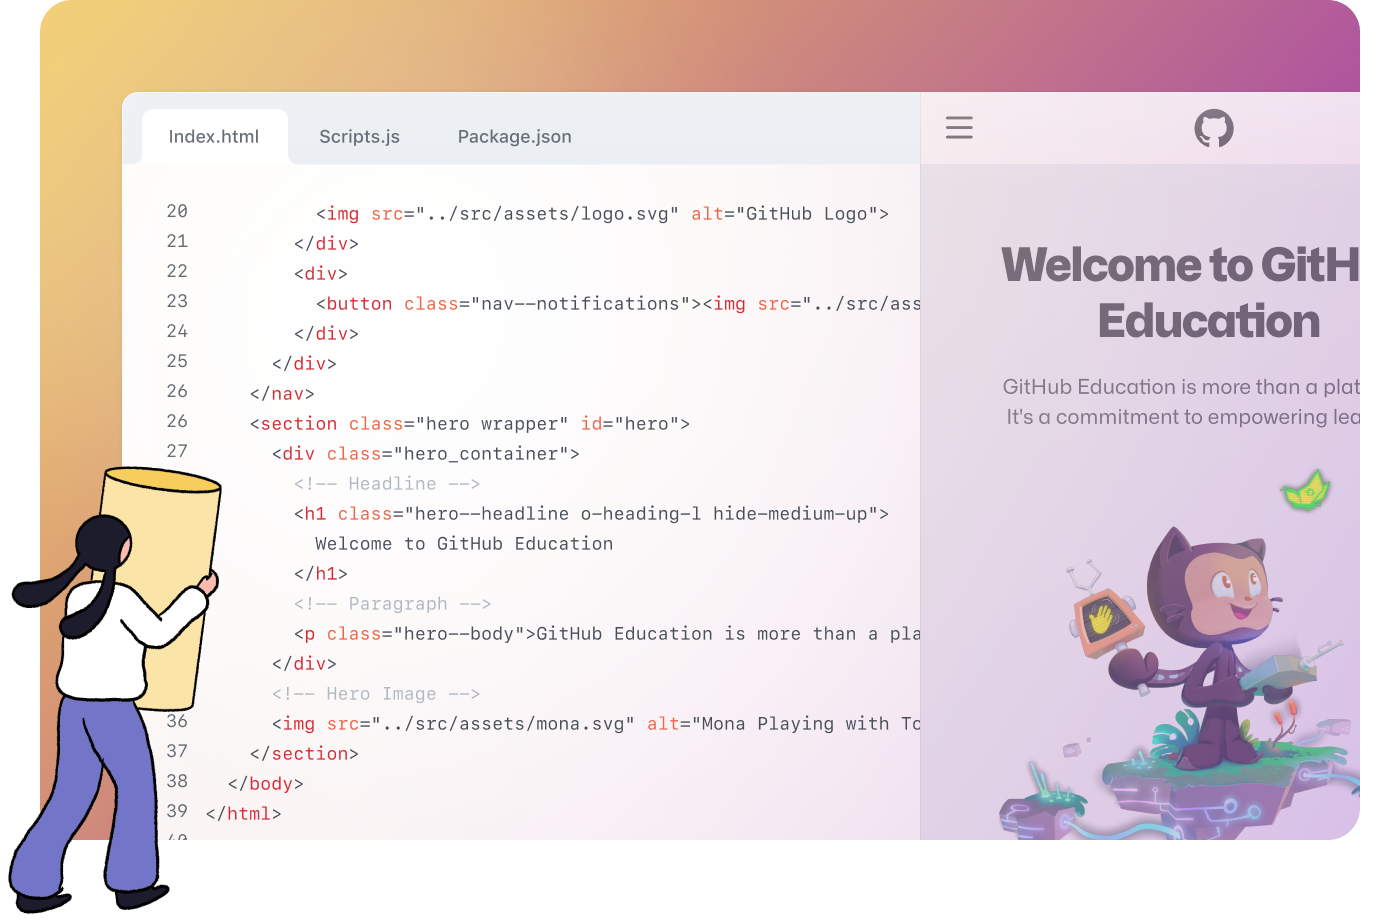 Cartoon person looking at code and webpage with text "Welcome to GitHub Education"